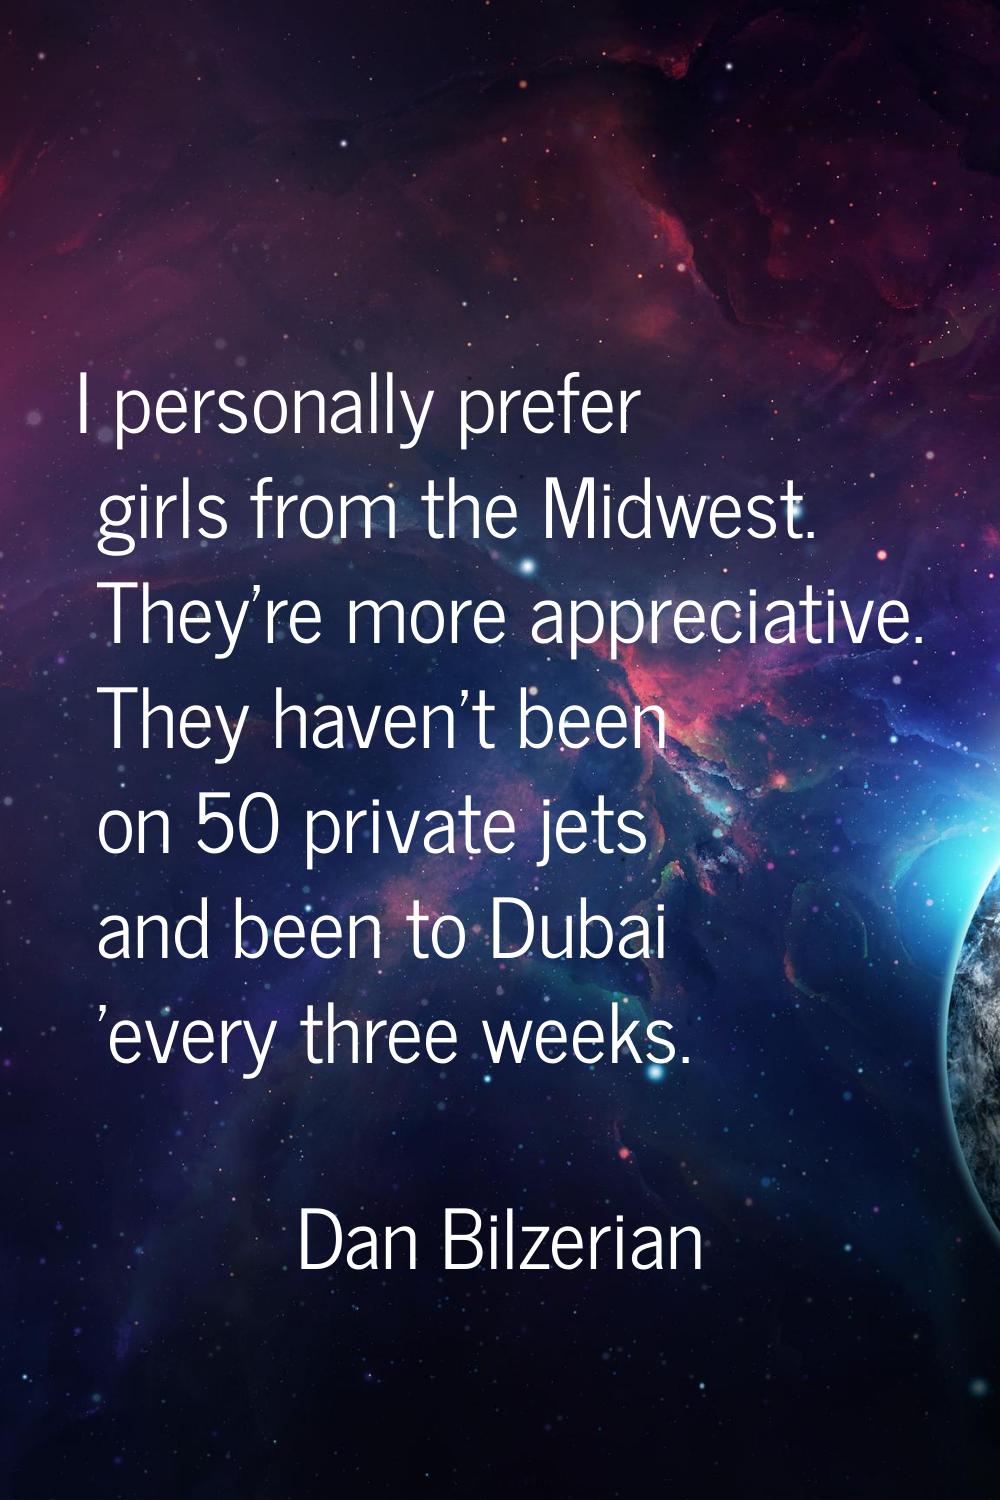 I personally prefer girls from the Midwest. They're more appreciative. They haven't been on 50 priv